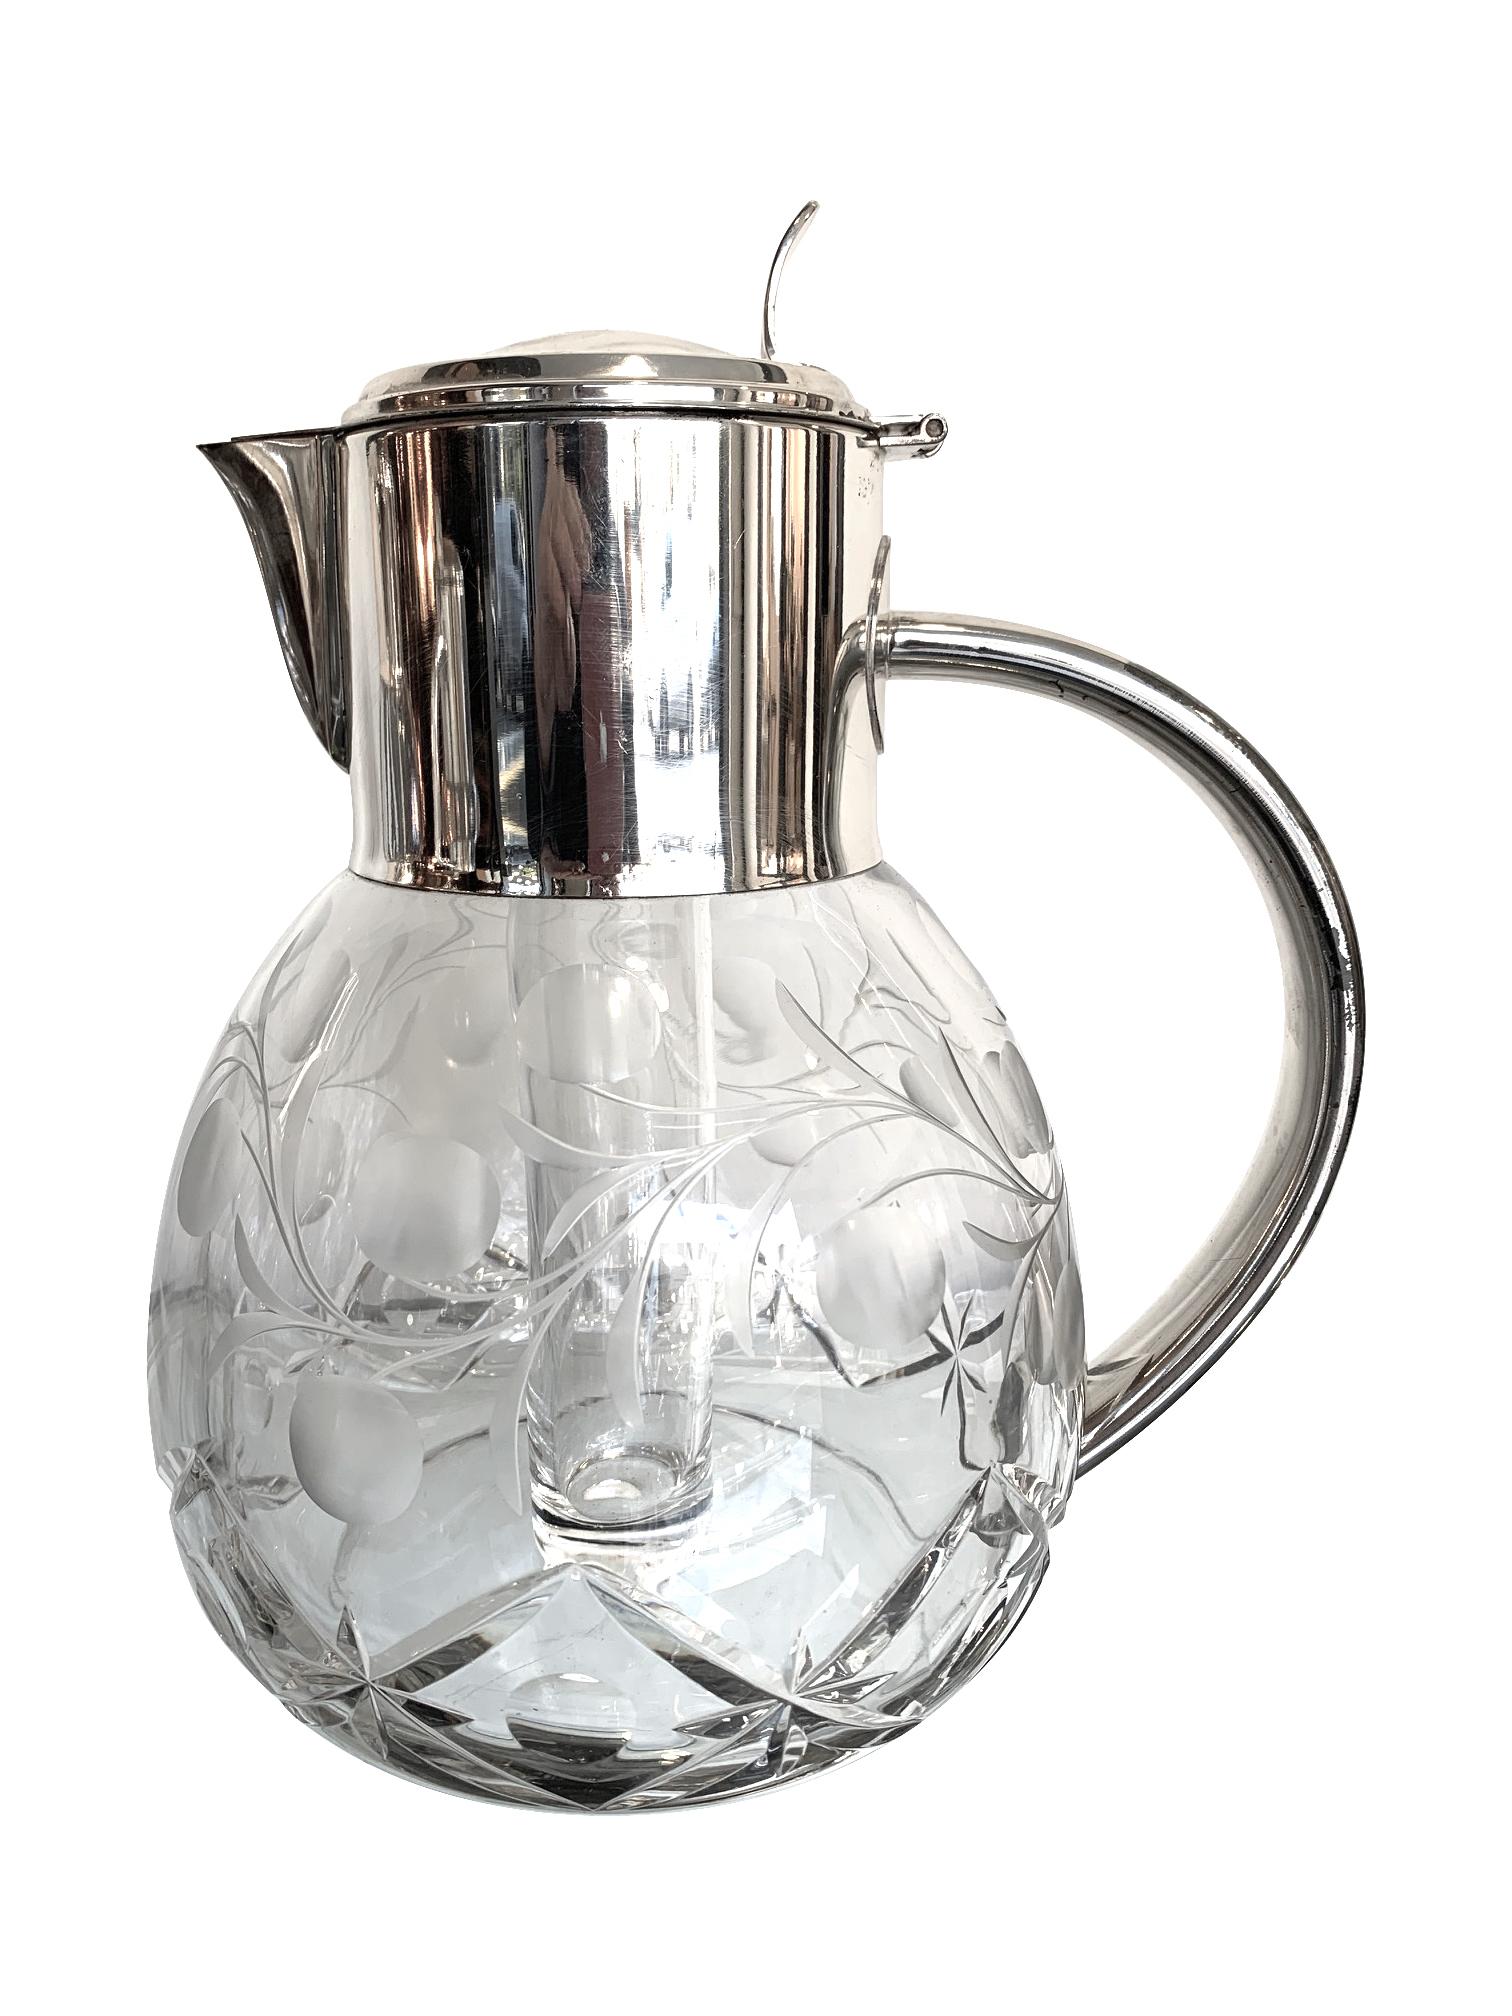 Early 20th Century English Silver Plated Crystal Lemonade / Cocktail Jug with Engraved Leaves